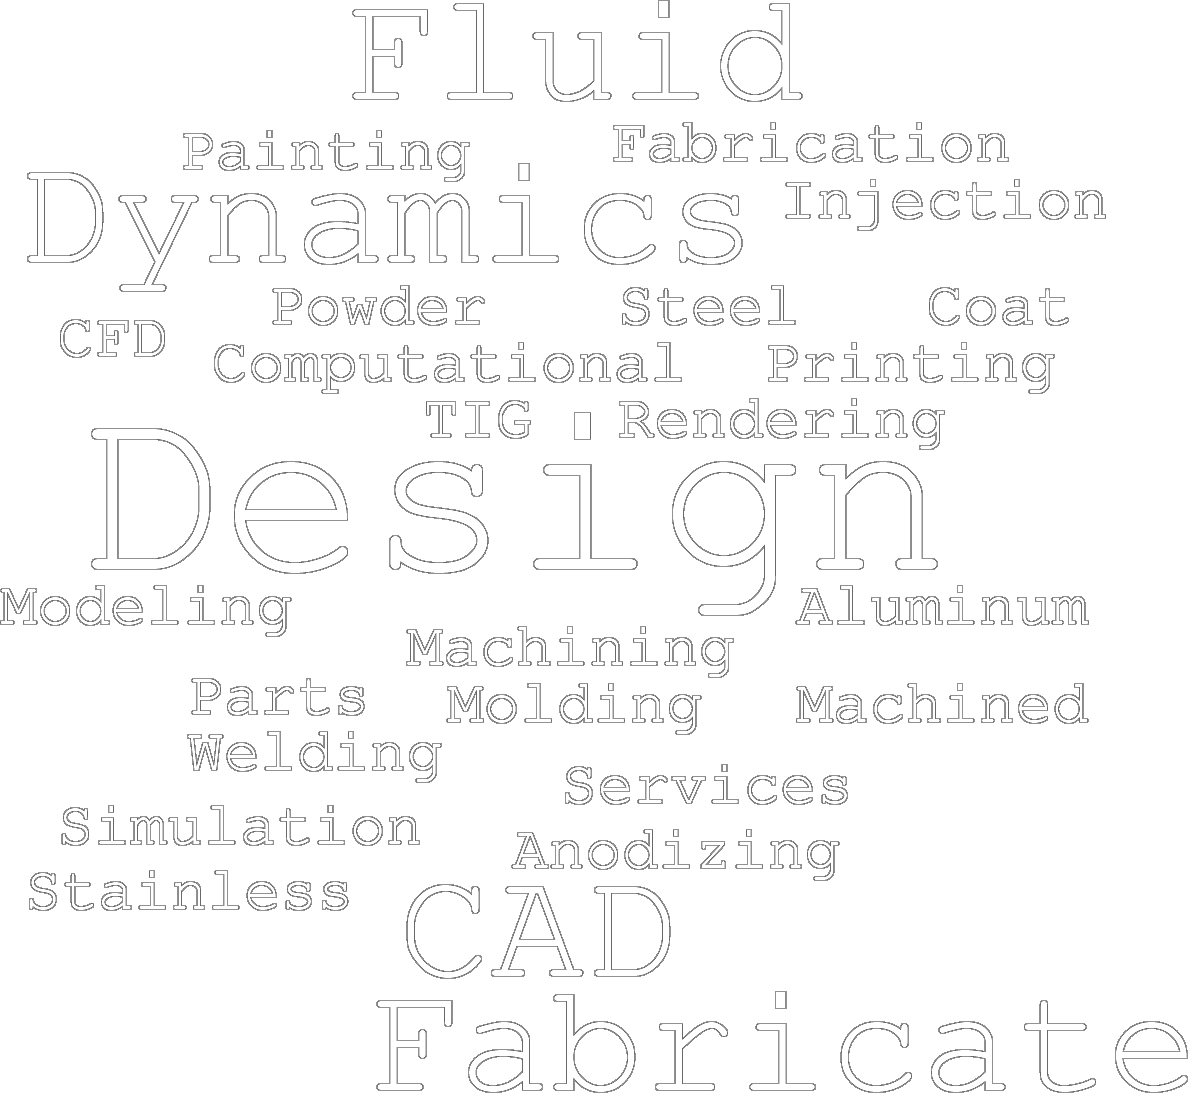 3D Modeling, Computational Fluid Dynamics CFD Simulation, 3D Printing, Design Machining, Design Injection Molding, Fabrication of Machined Parts, Powder Coat, Anodizing, Painting, Welding Services, TIG, Aluminum, Stainless Steel, CAD, Fabricate, Fluid Dynamics, Rendering, Design